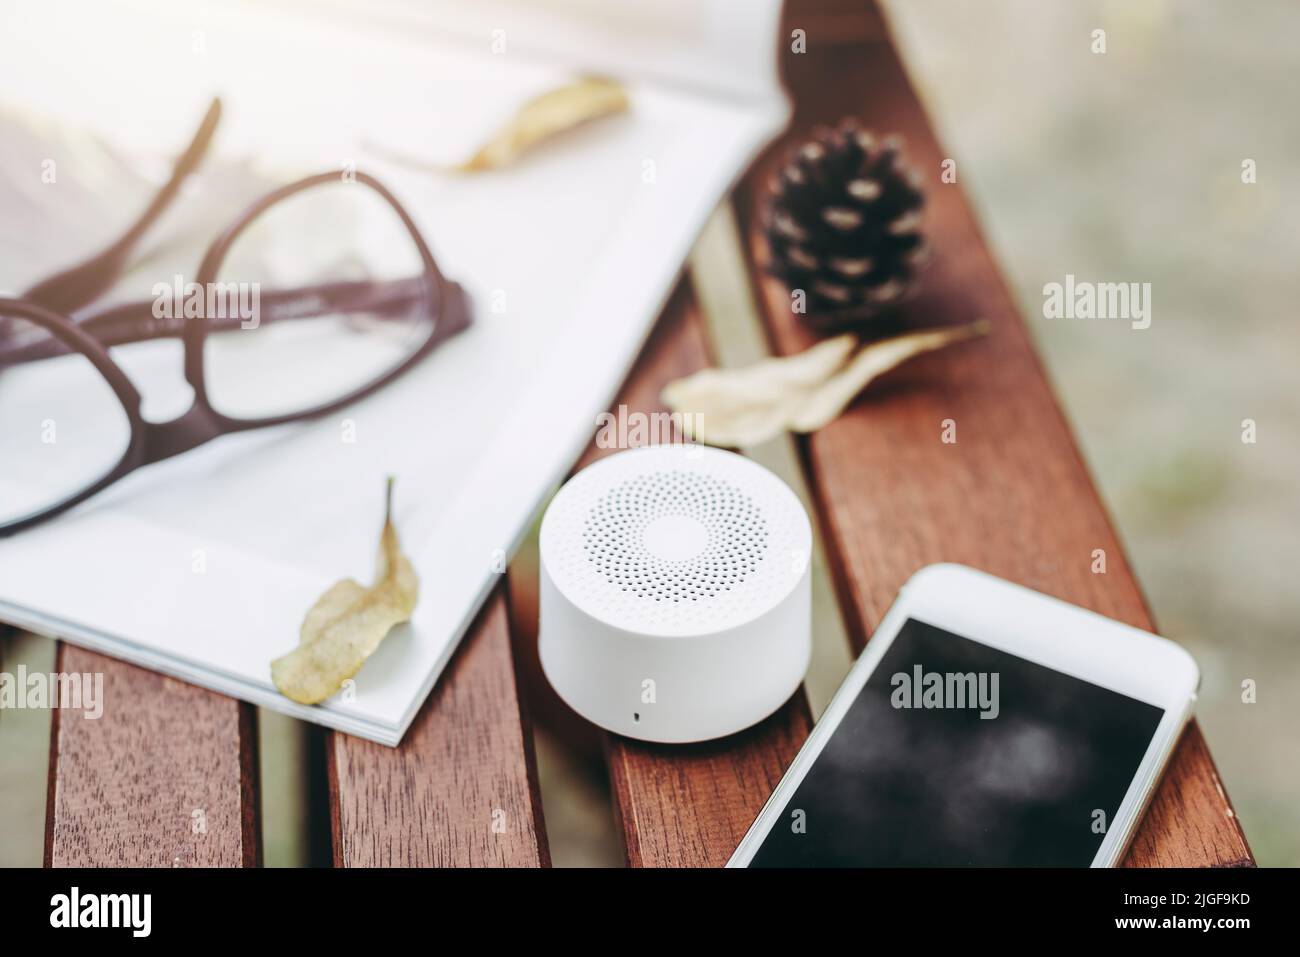 mini wireless portable bluetooth speaker for music listening. Voice assistant speaker at home. Stock Photo